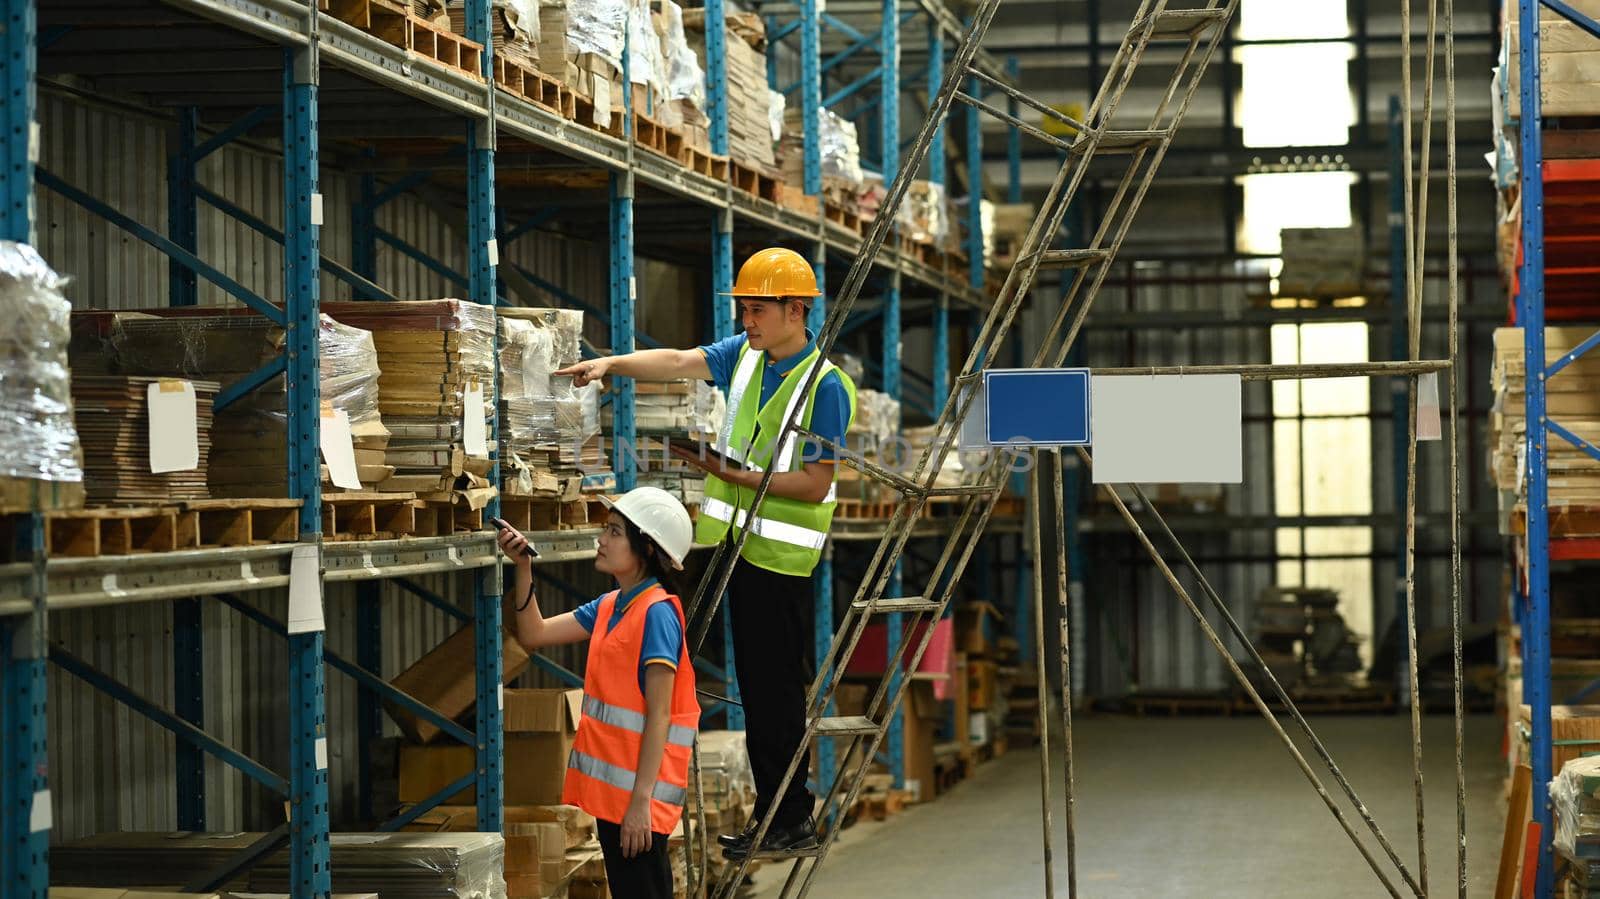 Male and female workers wearing hardhats and reflective jackets checking inventory boxes on shelf with barcode scanner.